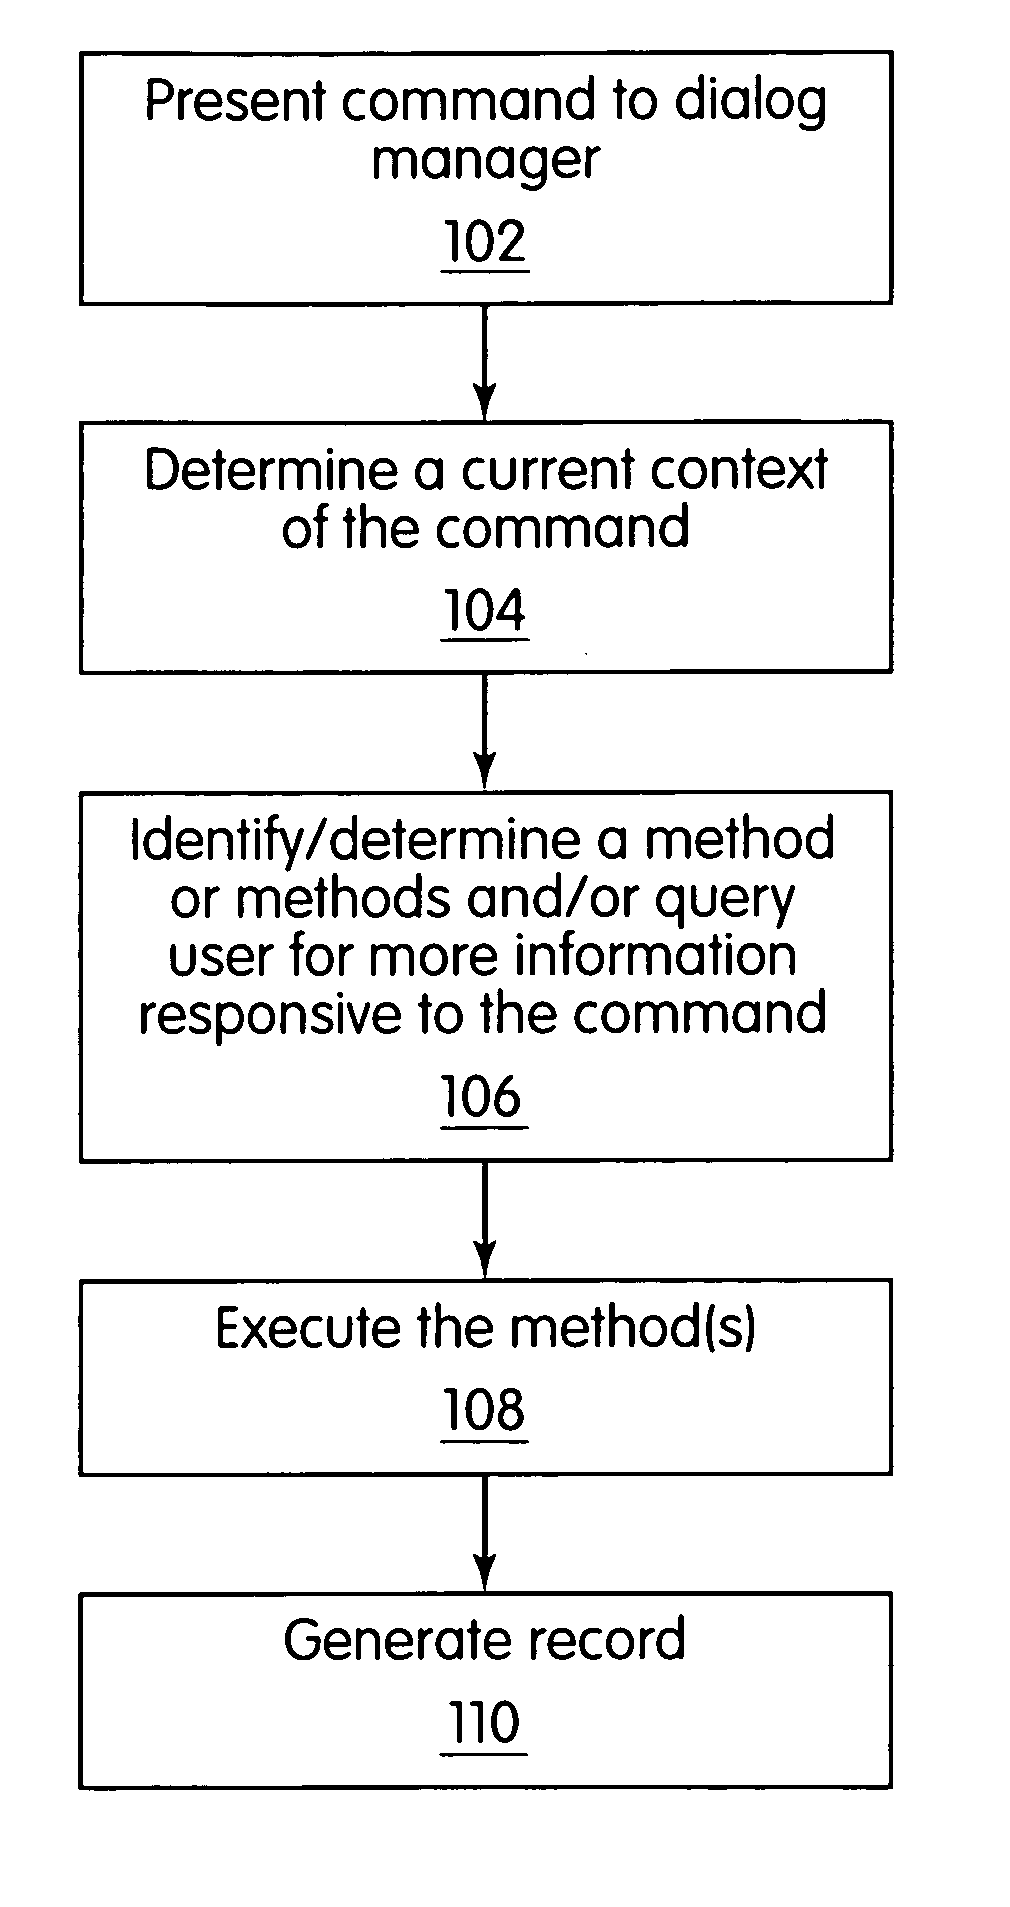 Method for determining and maintaining dialog focus in a conversational speech system